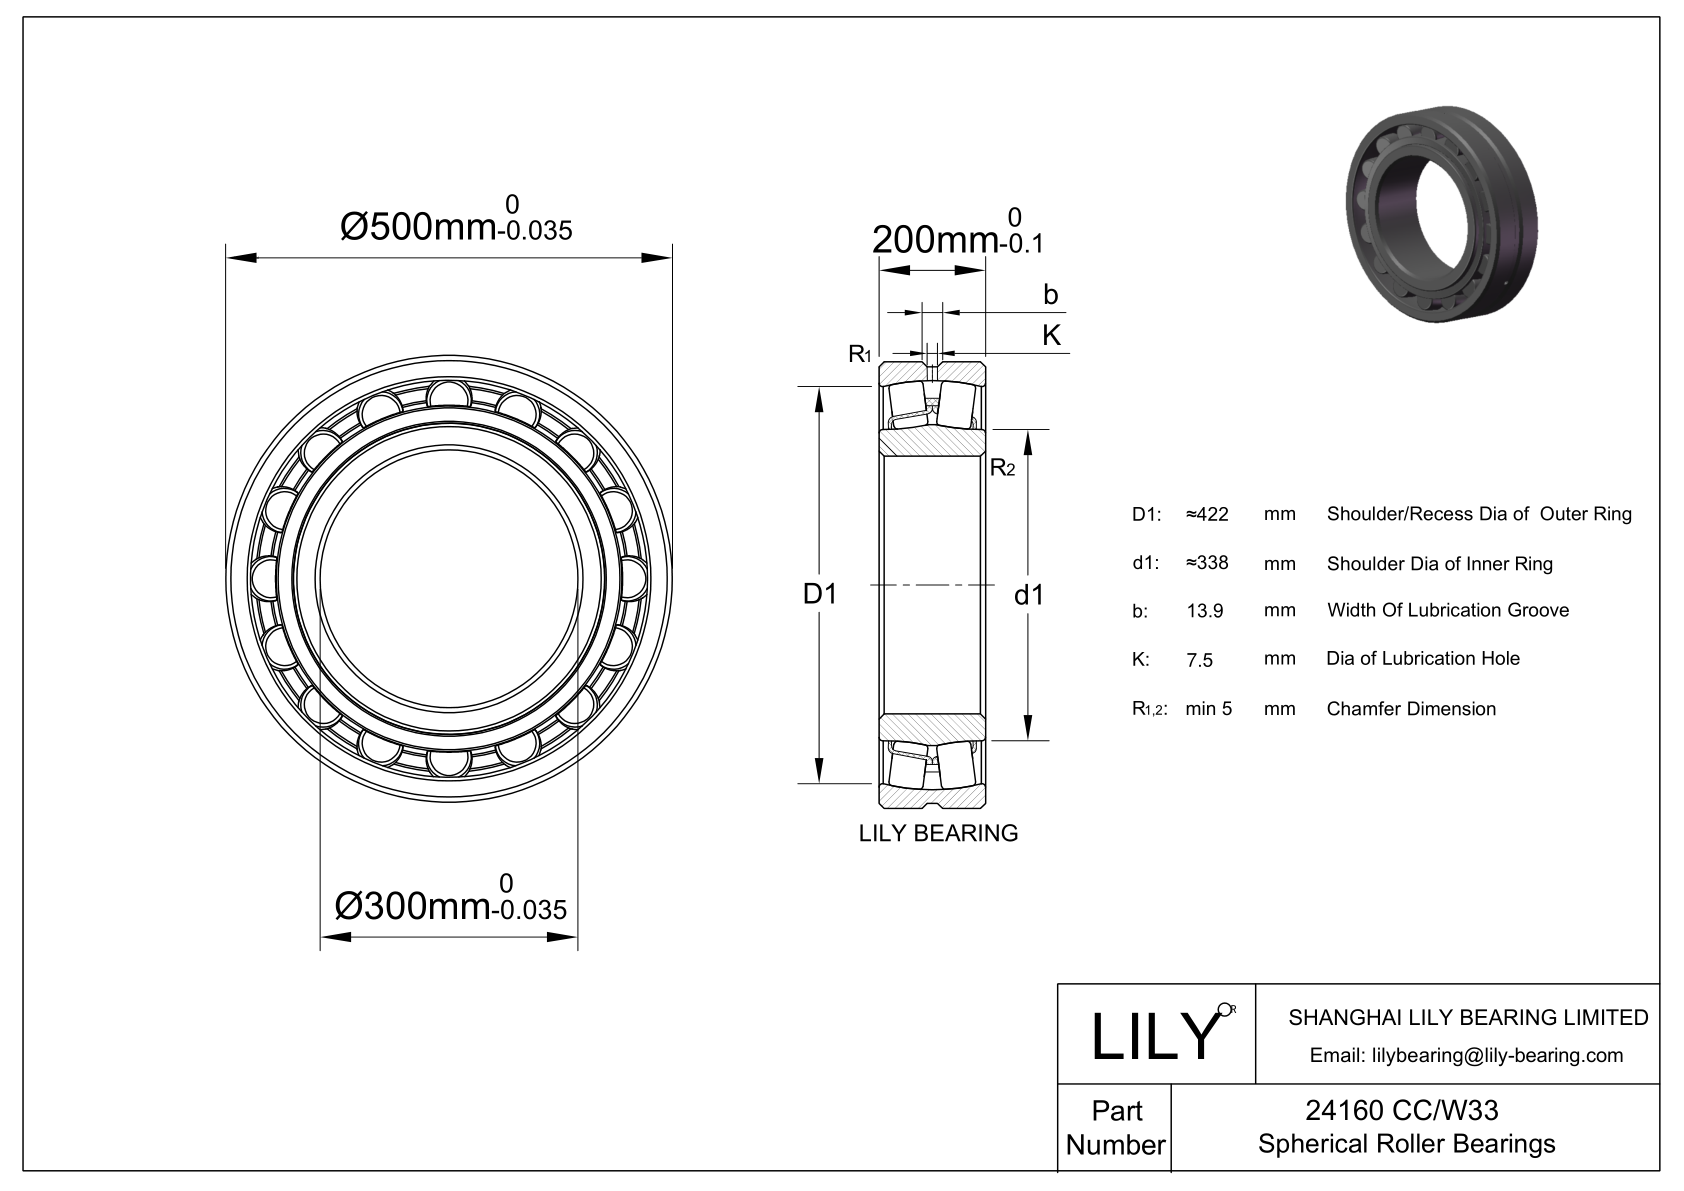 24160 CC/W33 Double Row Spherical Roller Bearing cad drawing